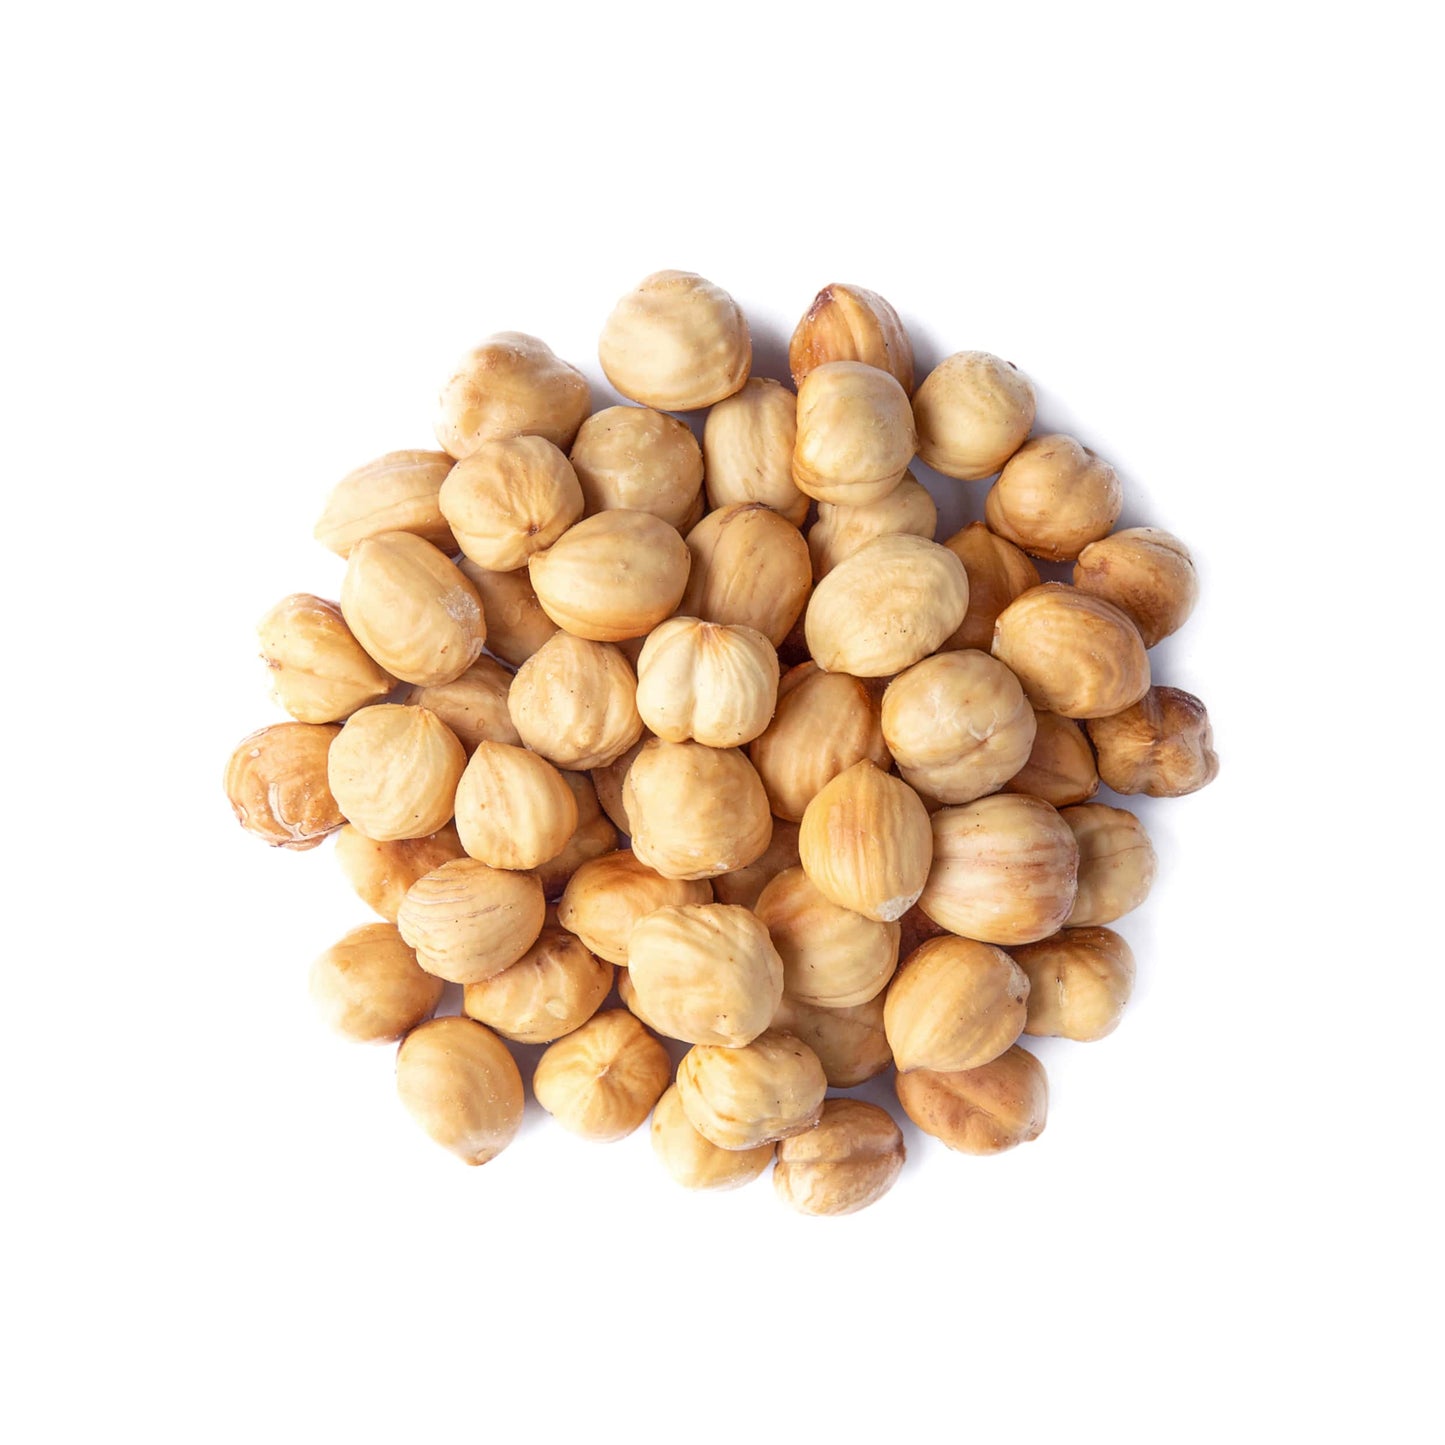 Dry Roasted Blanched Hazelnuts – Unsalted, Oven Roasted Whole Filberts, No Oil Added, No Skin, Vegan, Kosher, Bulk. High in Protein and Vitamin E. Perfect Snack. Great for Homemade Desserts